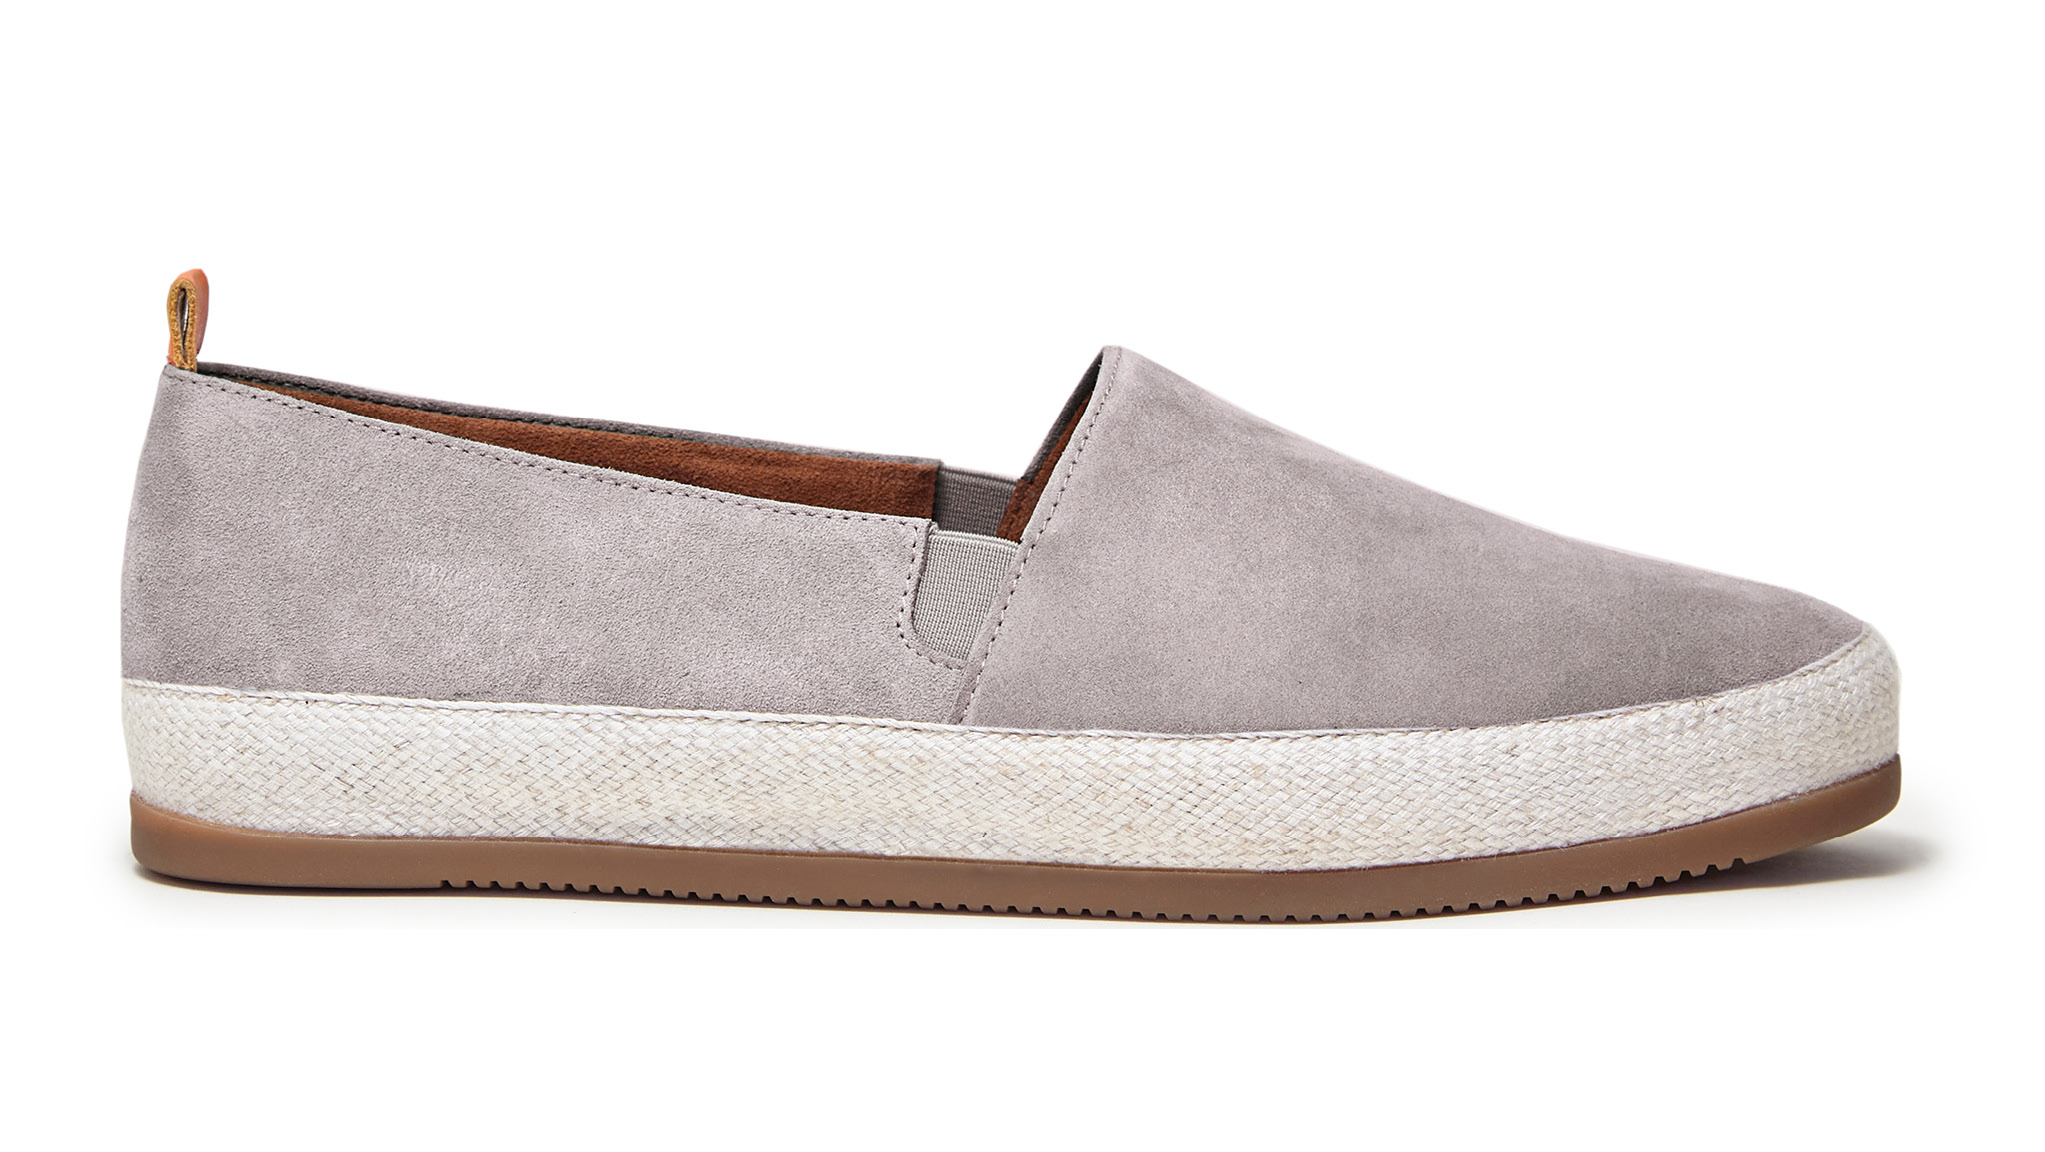 Mens Grey Espadrilles | MULO shoes | Handcrafted Suede Leather